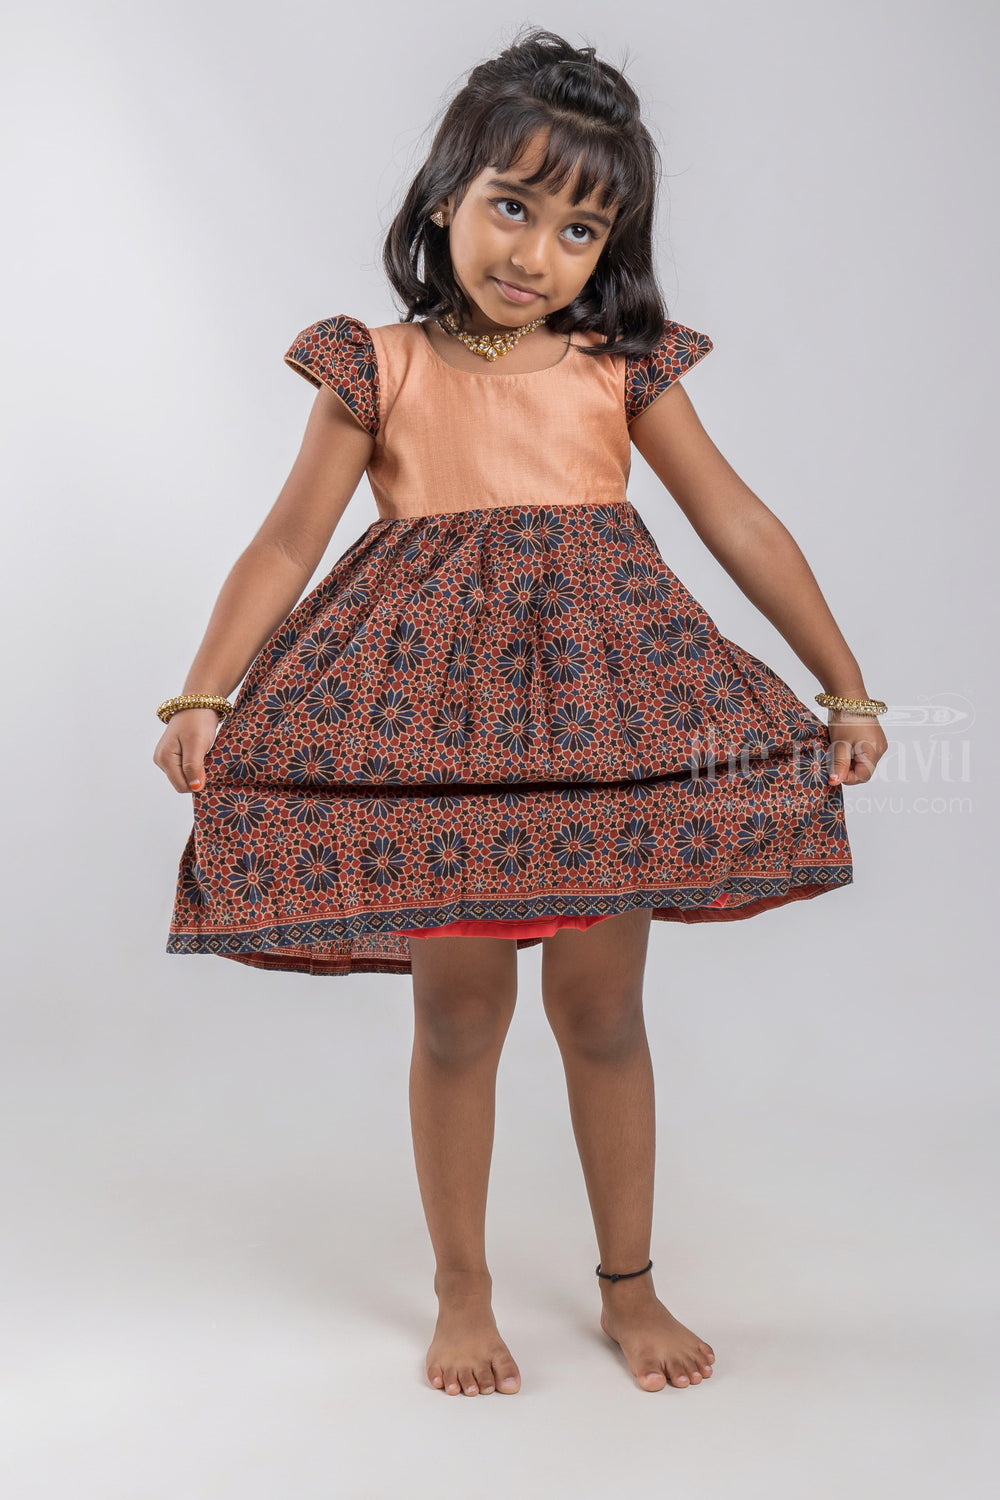 The Nesavu Girls Cotton Frock Soft Cotton Printed Brown Cotton Gown For Baby Girls With Contrasting Yoke With Floral printed Sleeves psr silks Nesavu